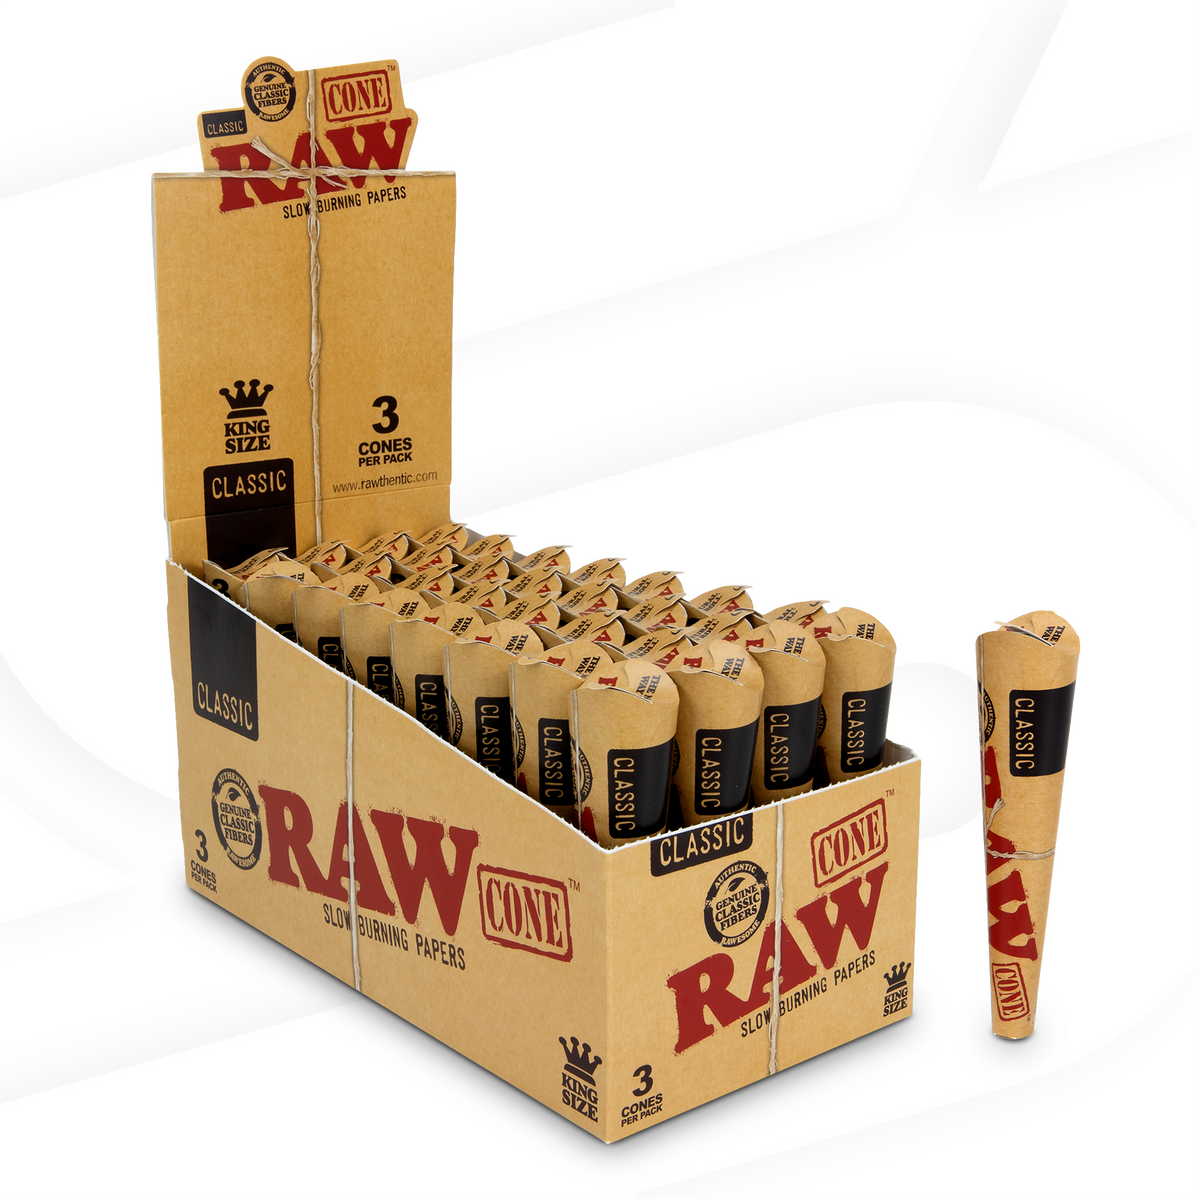 RAW Classic King Size Cones - 3 Pack RAW Cones RAWB-CNCL-KS02 esd-official